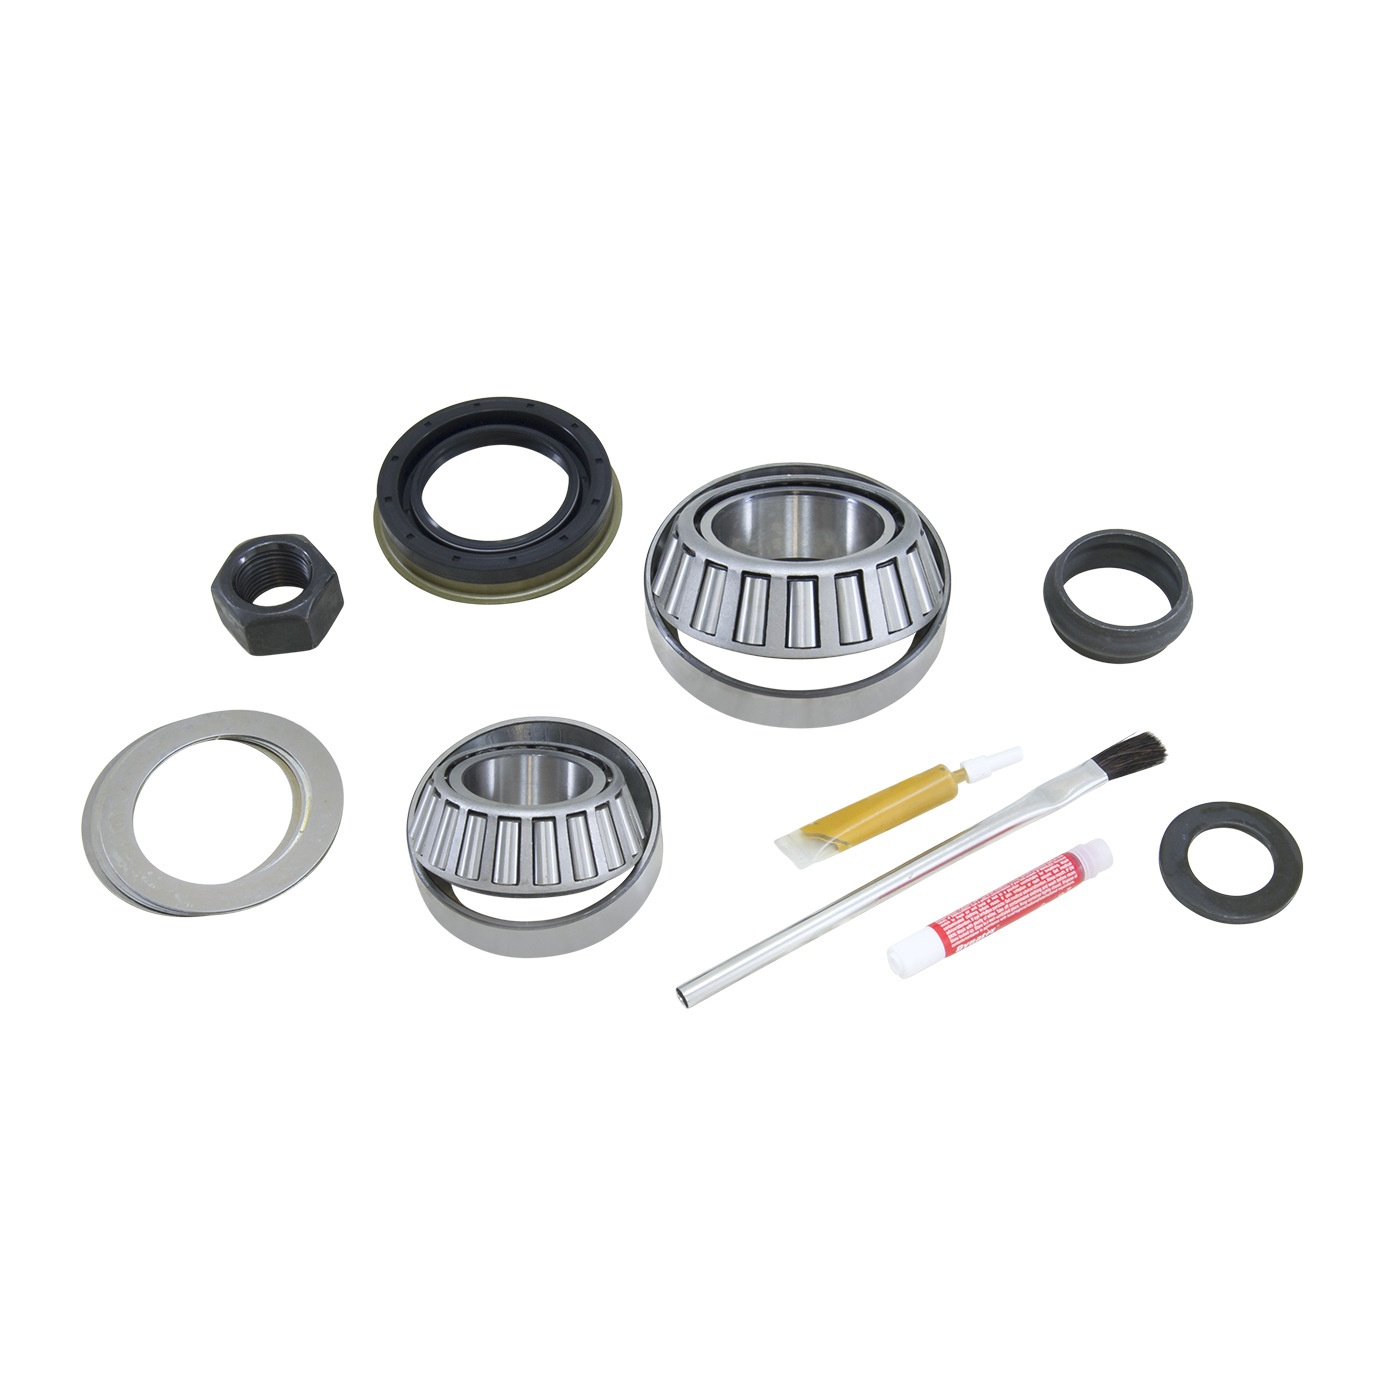 Pinion Install Kit For Dana 50 Ifs Differential